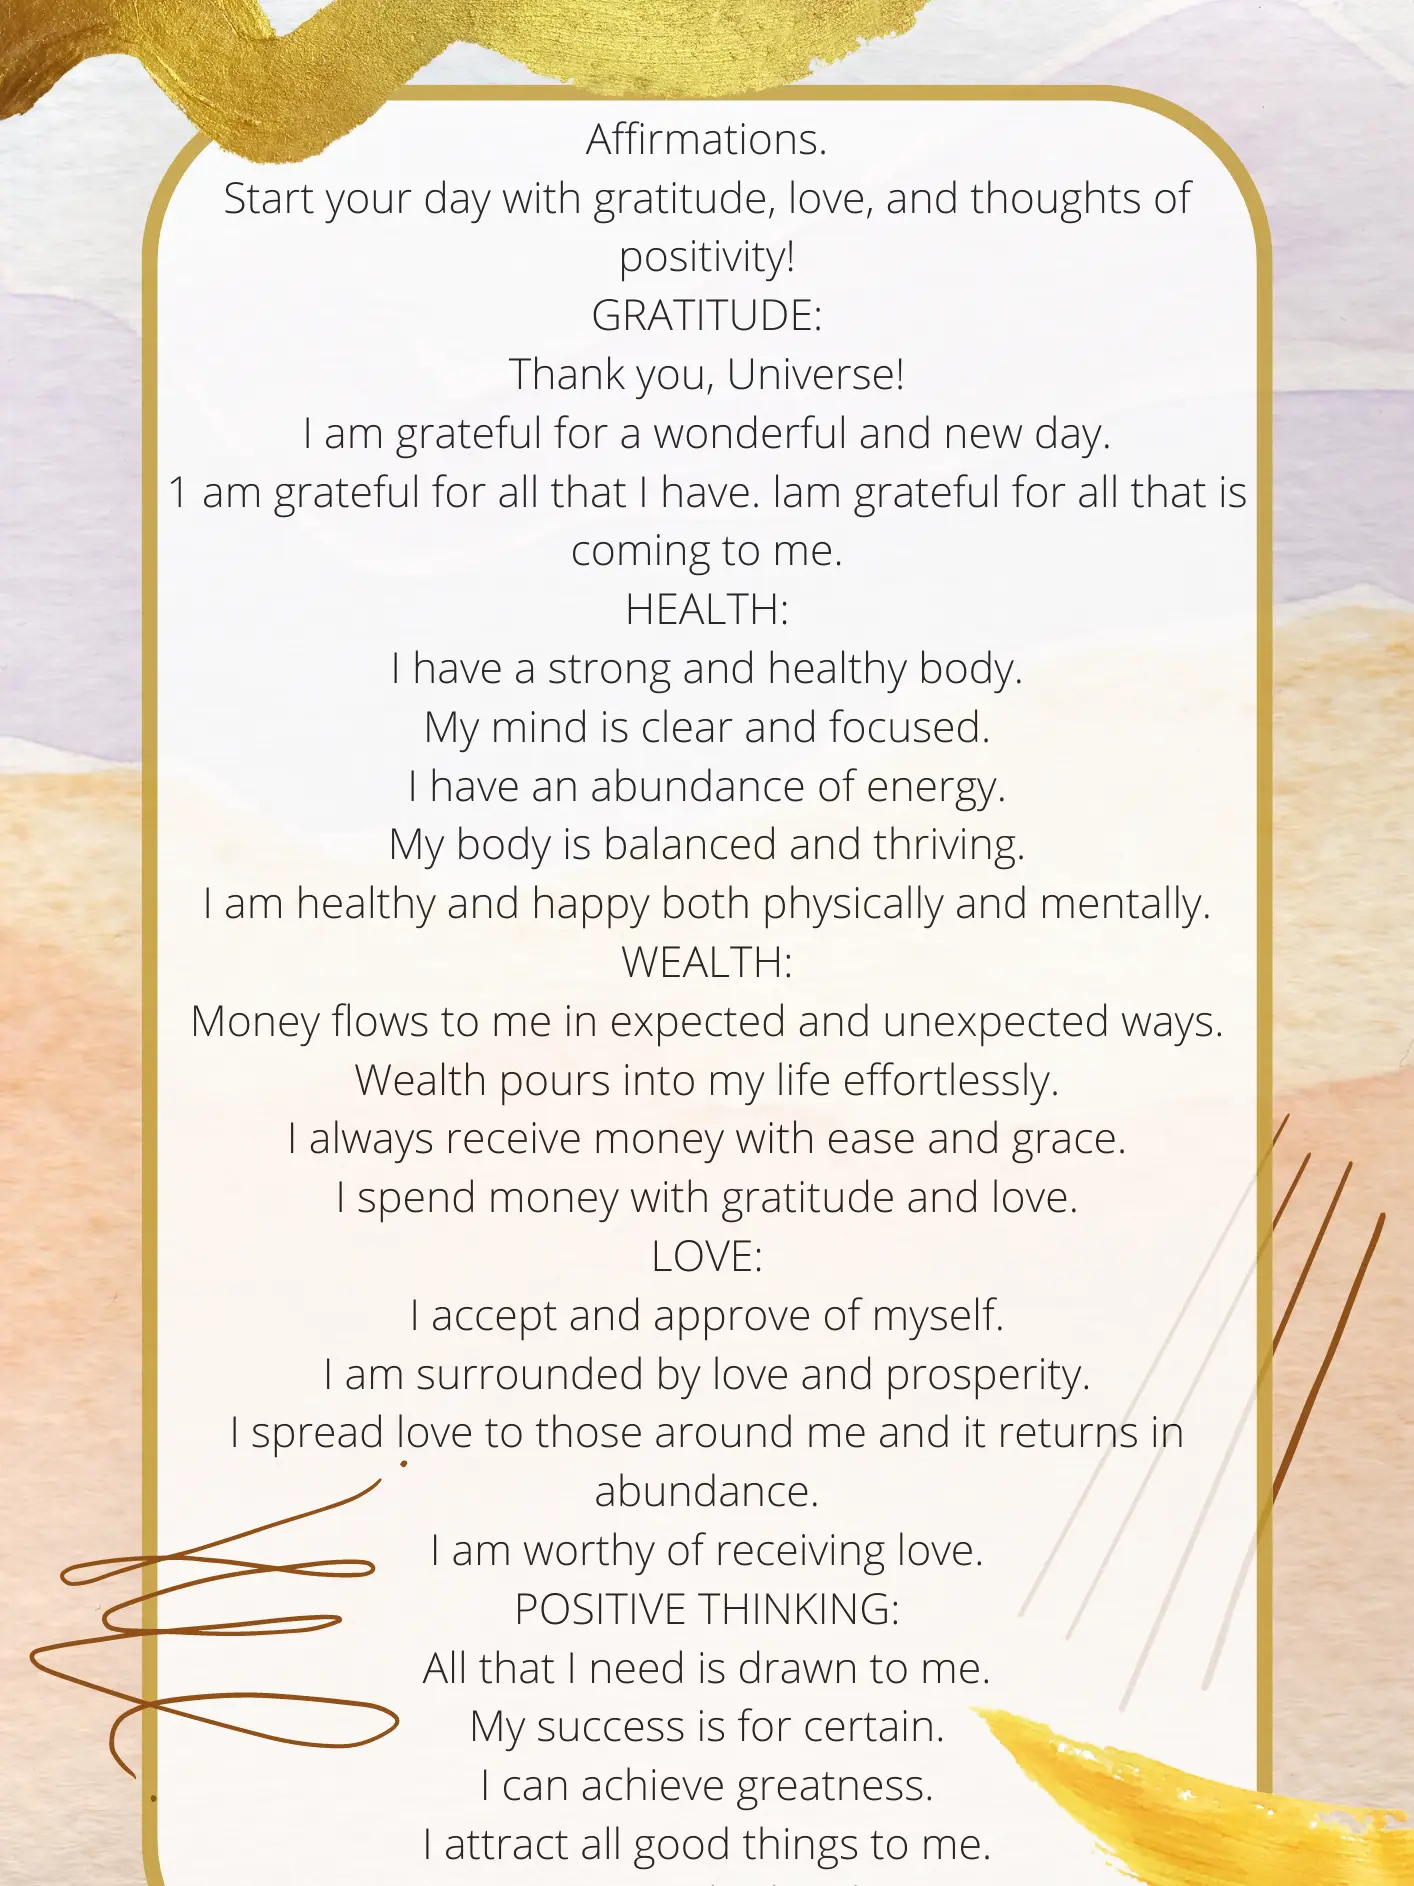 I Am Wealthy Healthy Happy Loved and Rich  Powerful Prosperity  Affirmations 